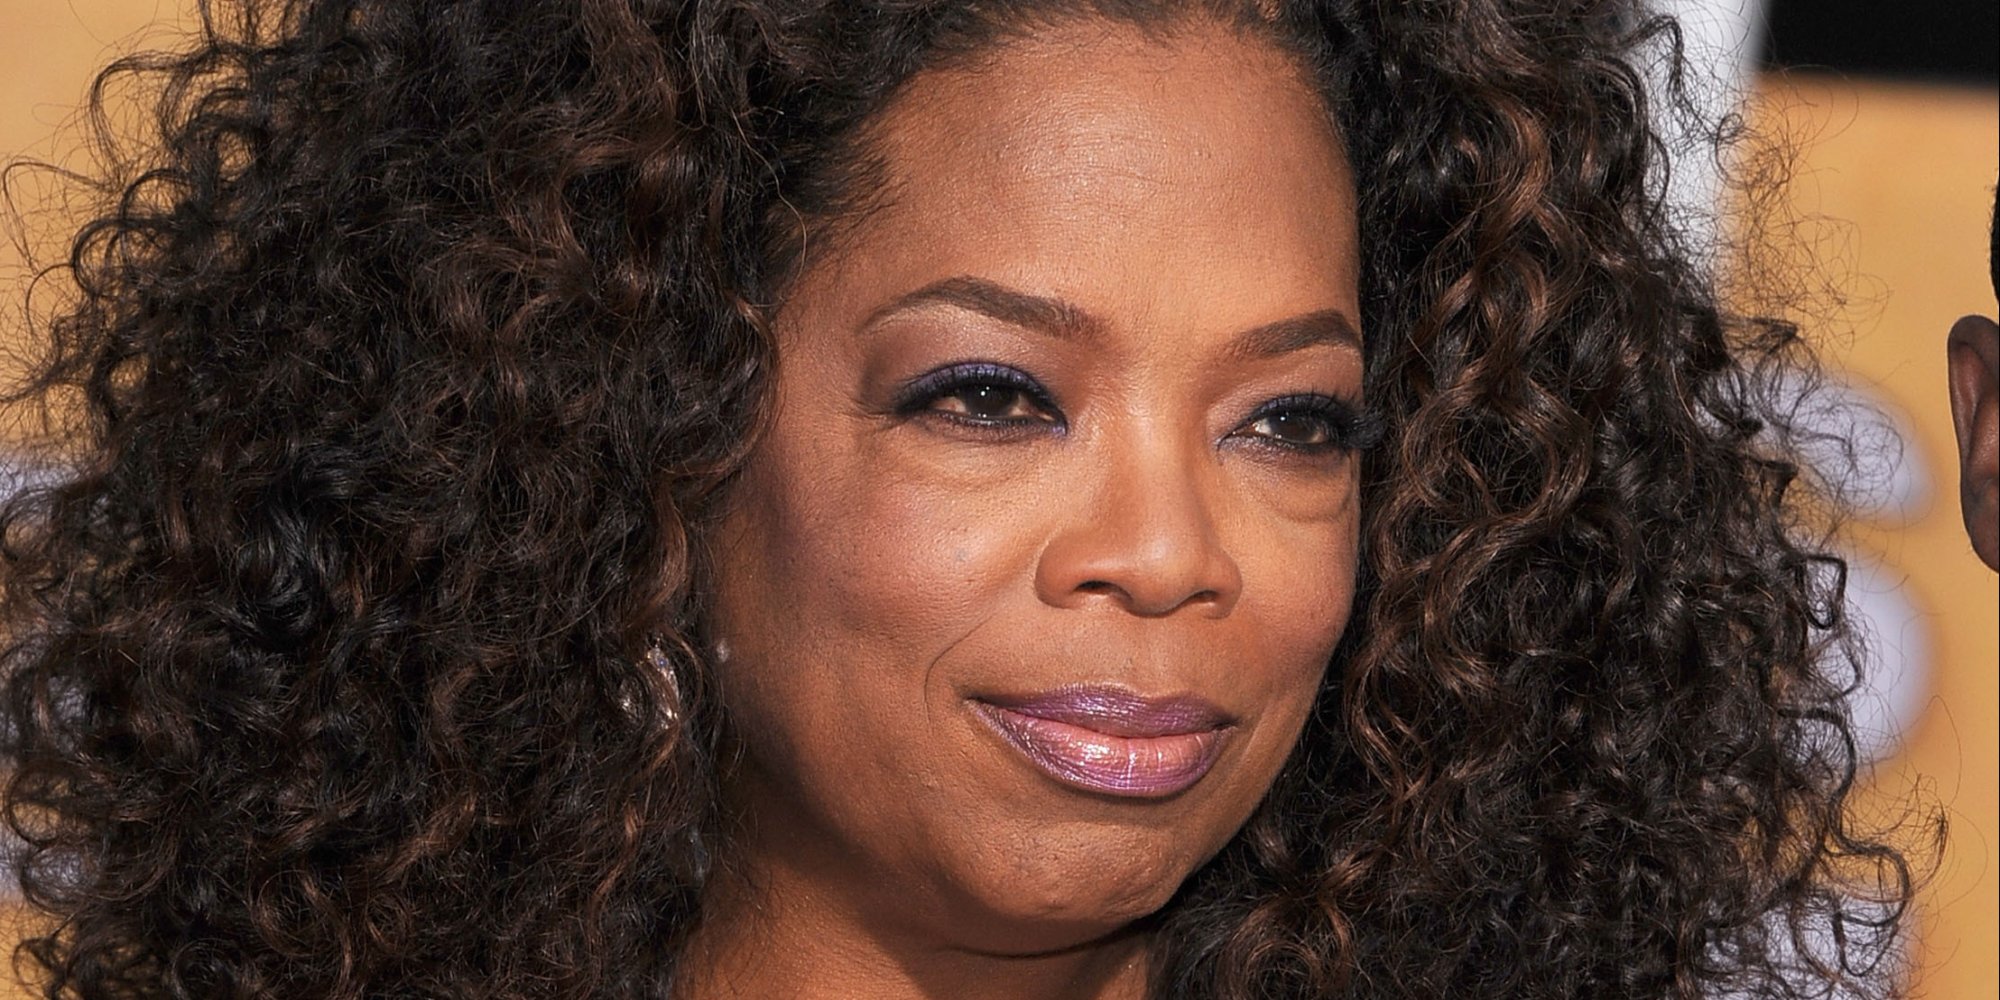 Oprah Winfrey has discovered that her "secret son" had set her up with news tabloids at the taping of The Late Show with Stephen Colbert, and has since backed out of her intention to get in touch with him, The Daily Mail reports.